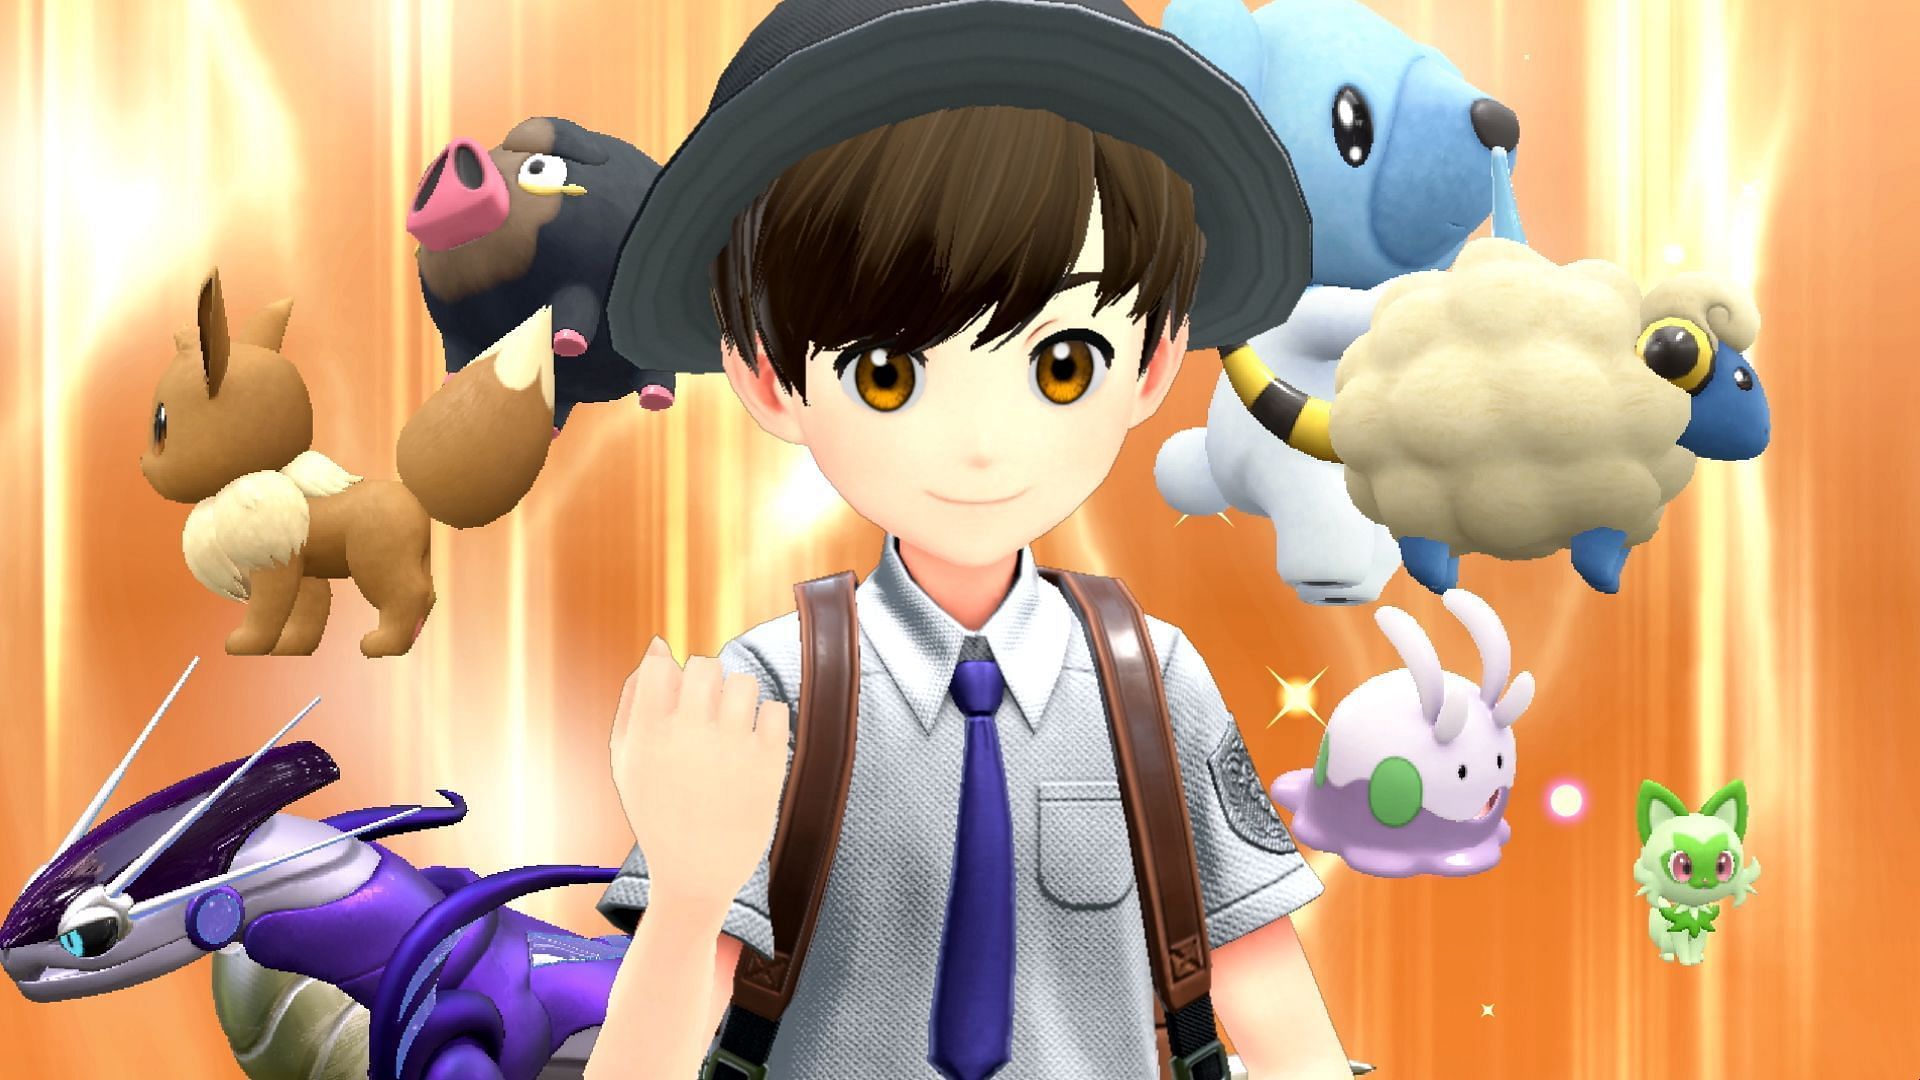 An official screenshot from Pokemon Violet (Image via The Pokemon Company)